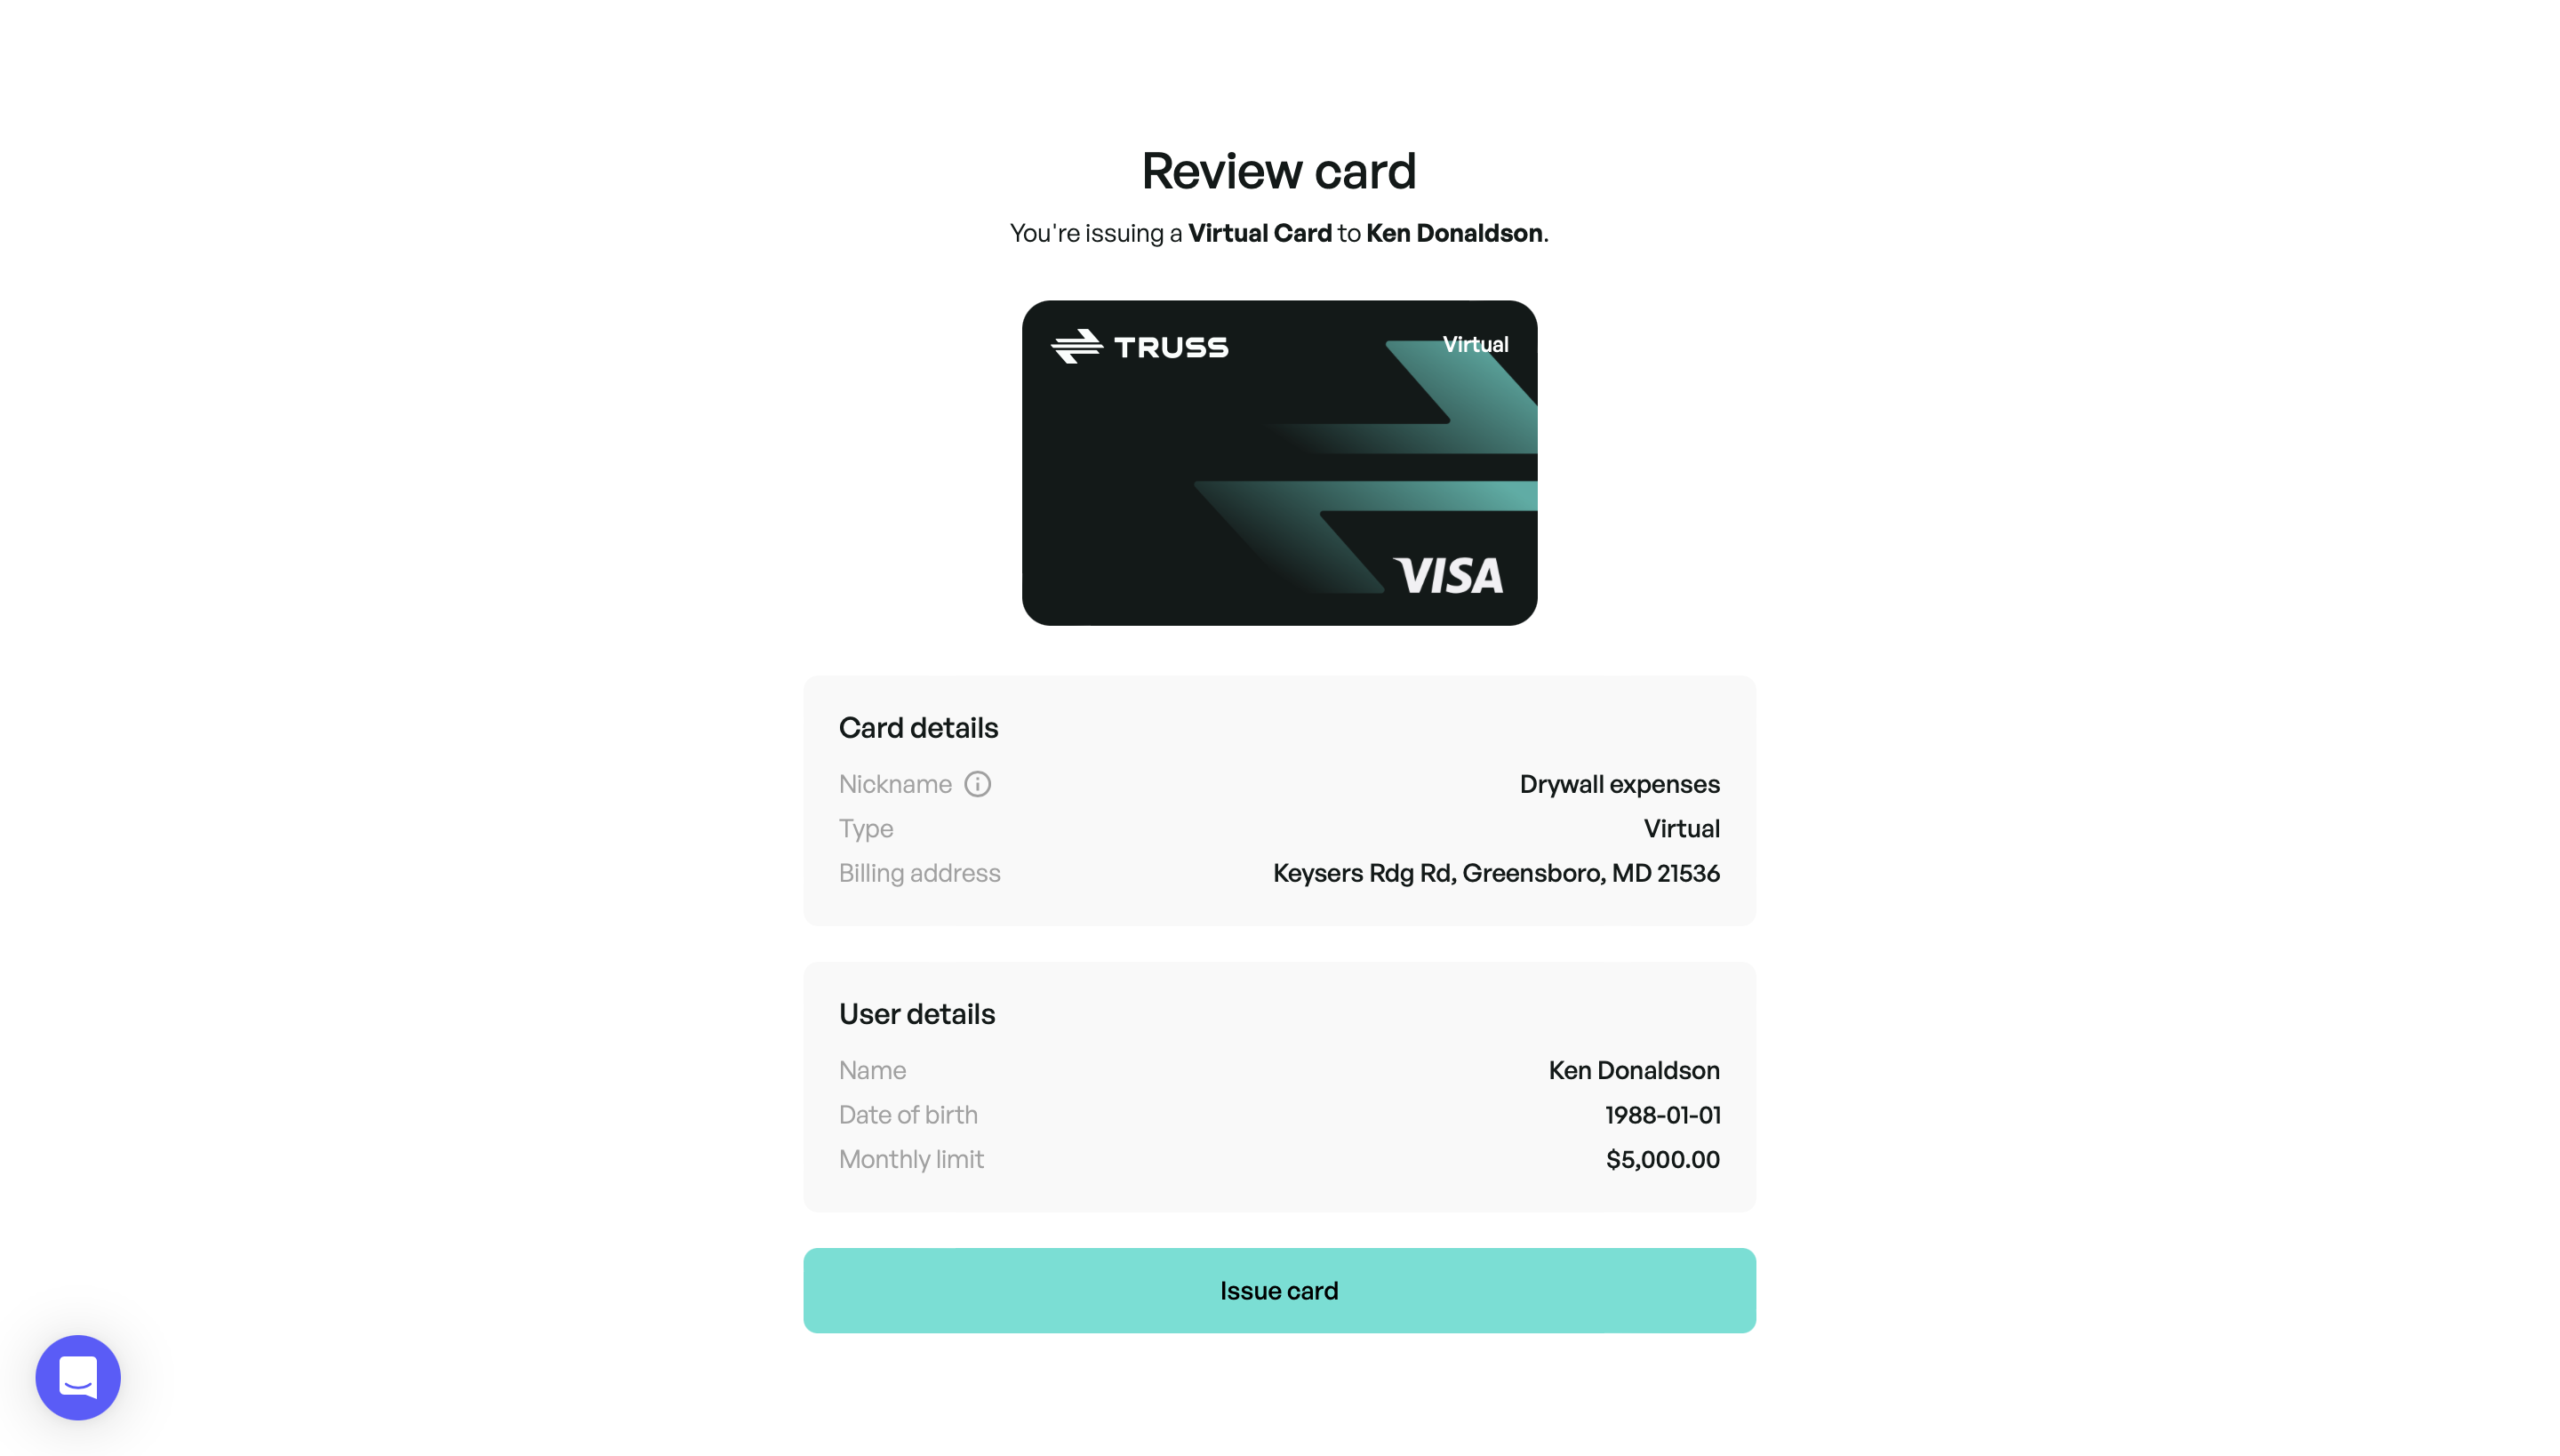 Order physical cards for your staff to use in-store and create unlimited virtual cards with individual spend limits.